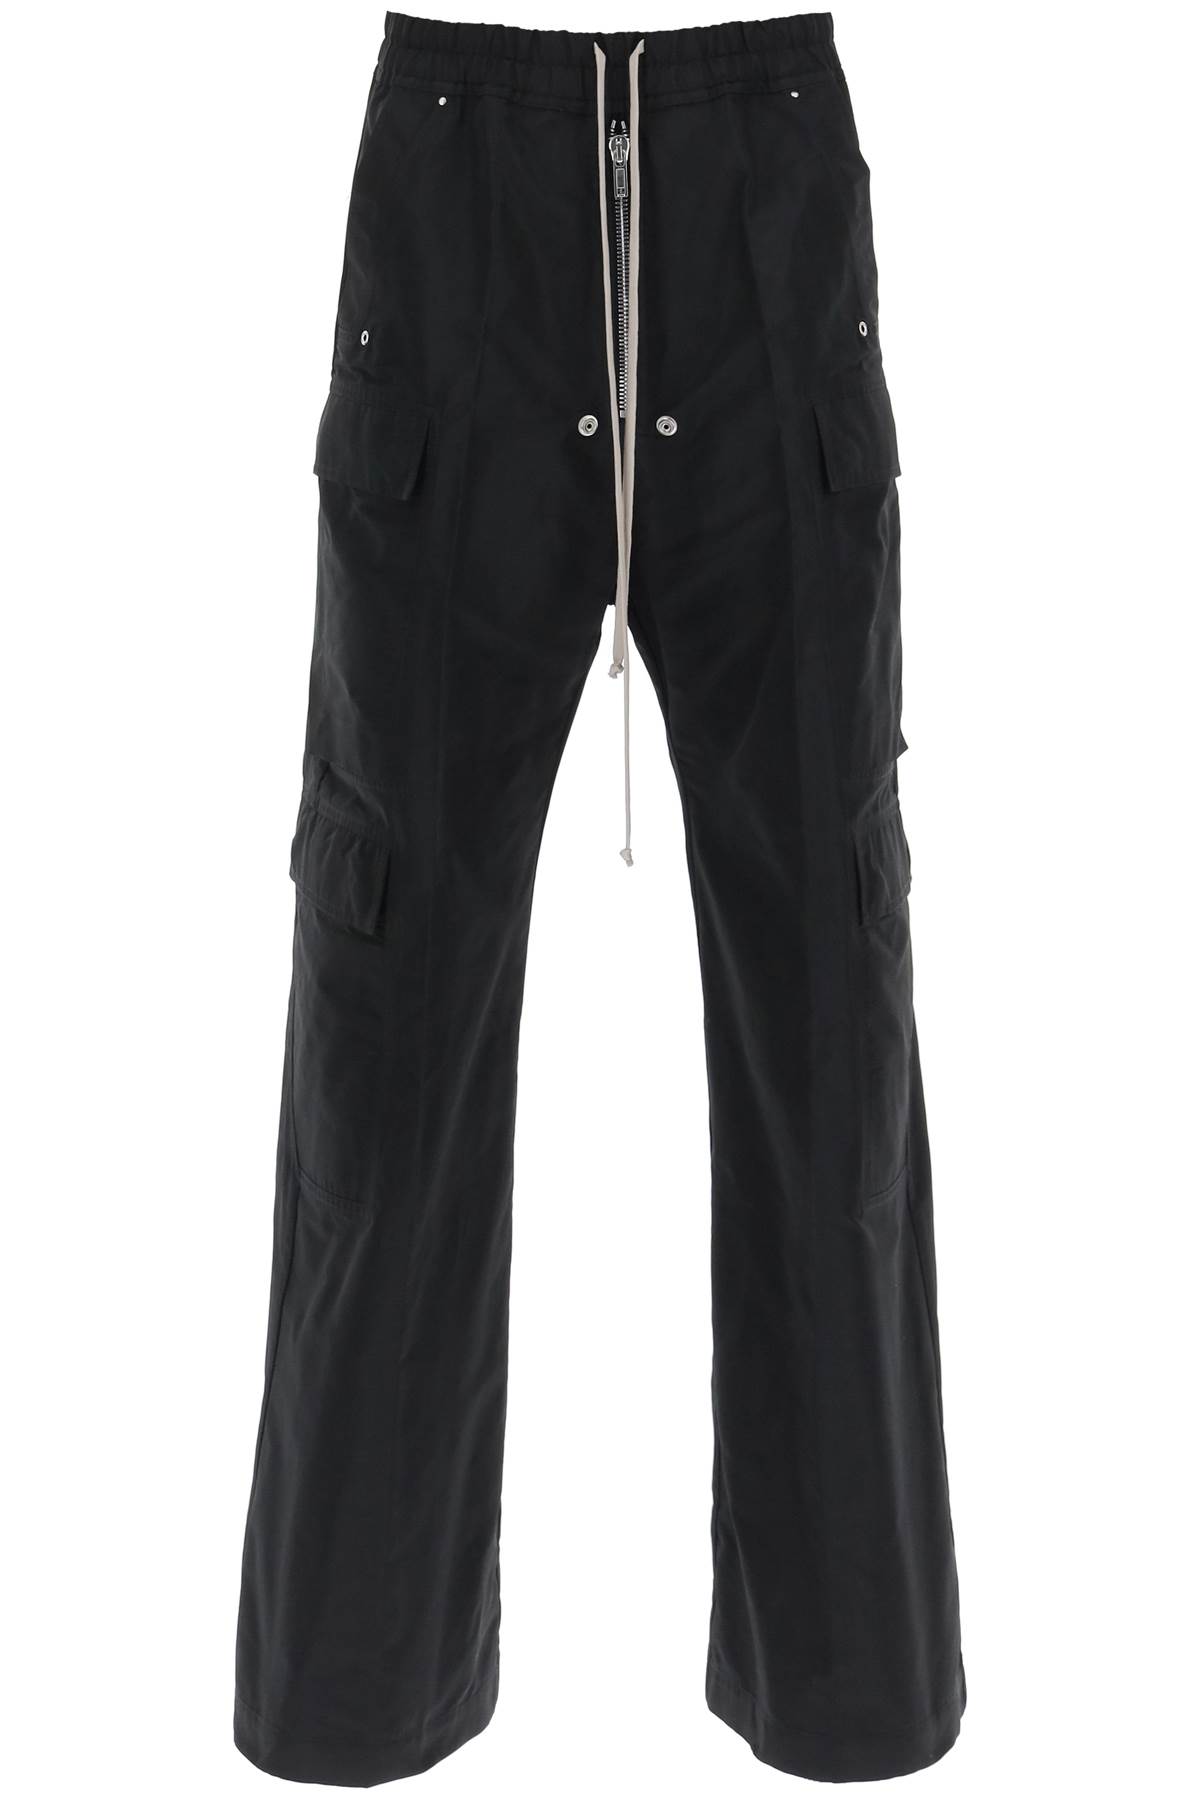 RICK OWENS CARGO PANTS IN FAILLE